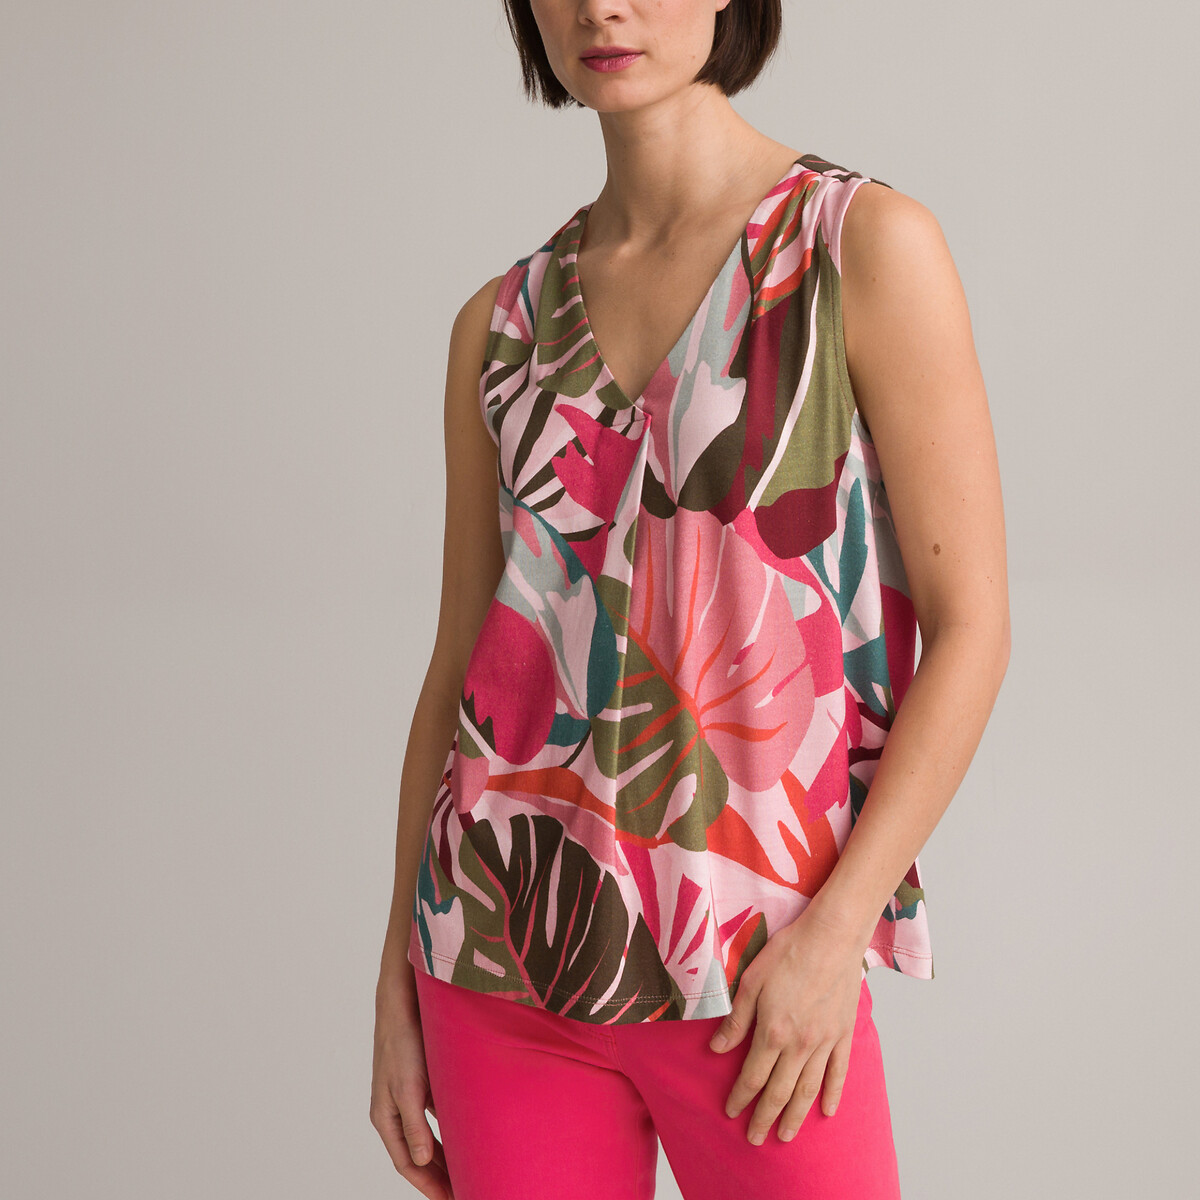 Printed Sleeveless Vest Top in Cotton Mix with V-Neck